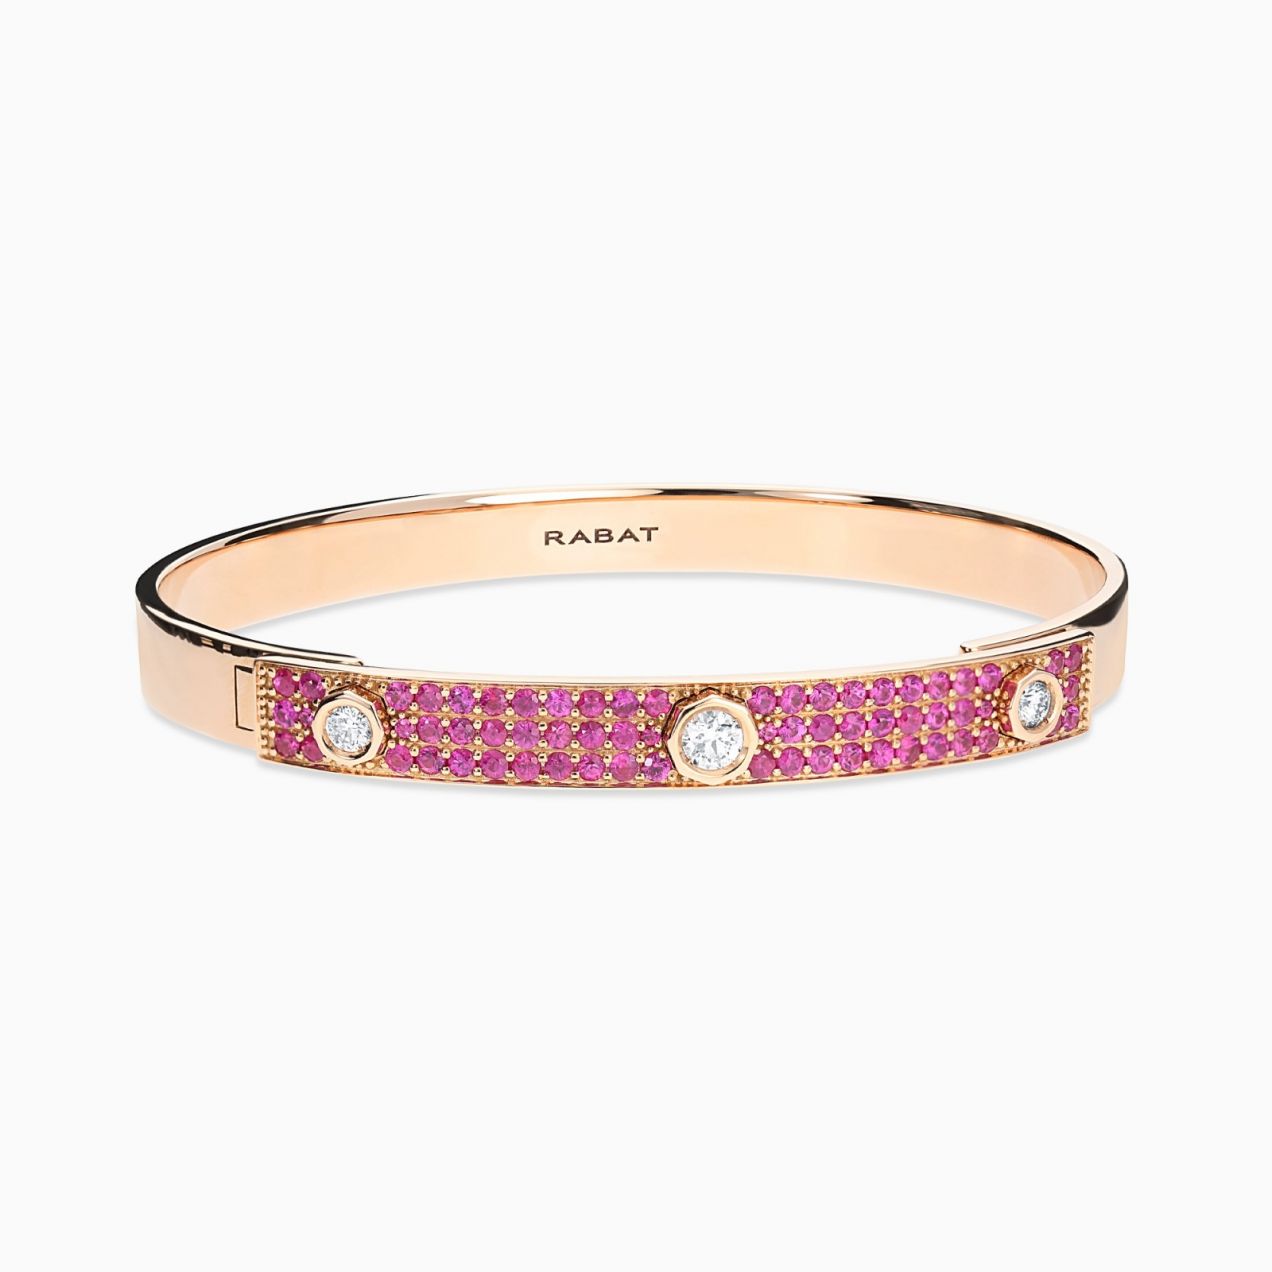 Rose gold bracelet with three central diamonds and red rubies pavé